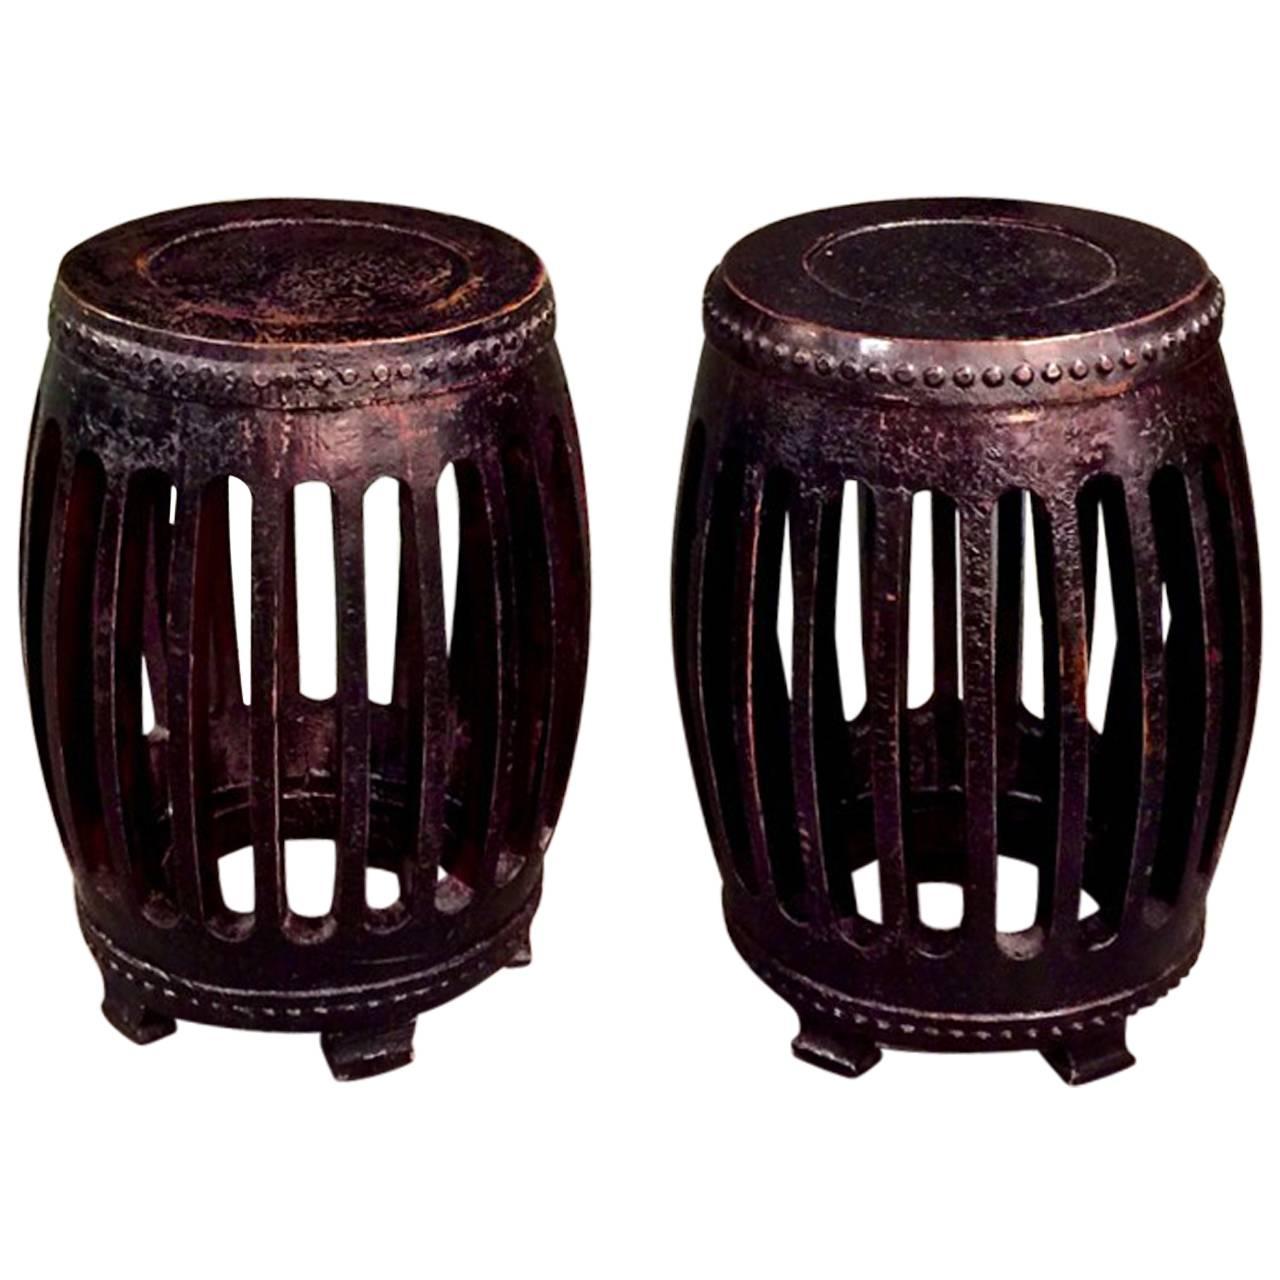 Pair of Early 20th Century Chinese Garden Stools